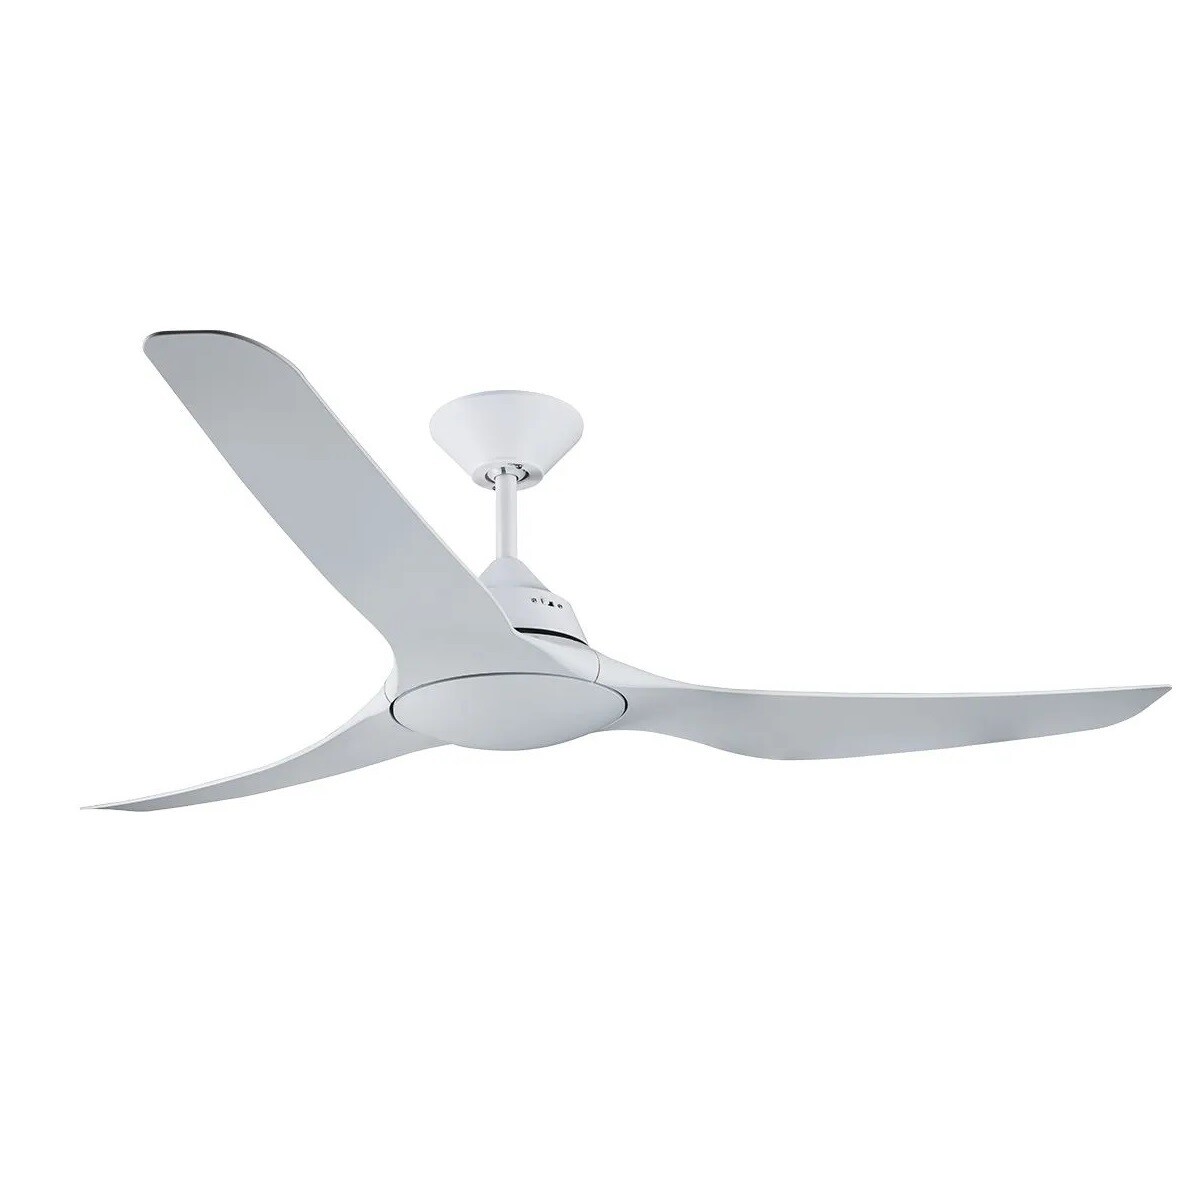 MARINER WH/WH outdoor ceiling fan Ø142cm wall control included